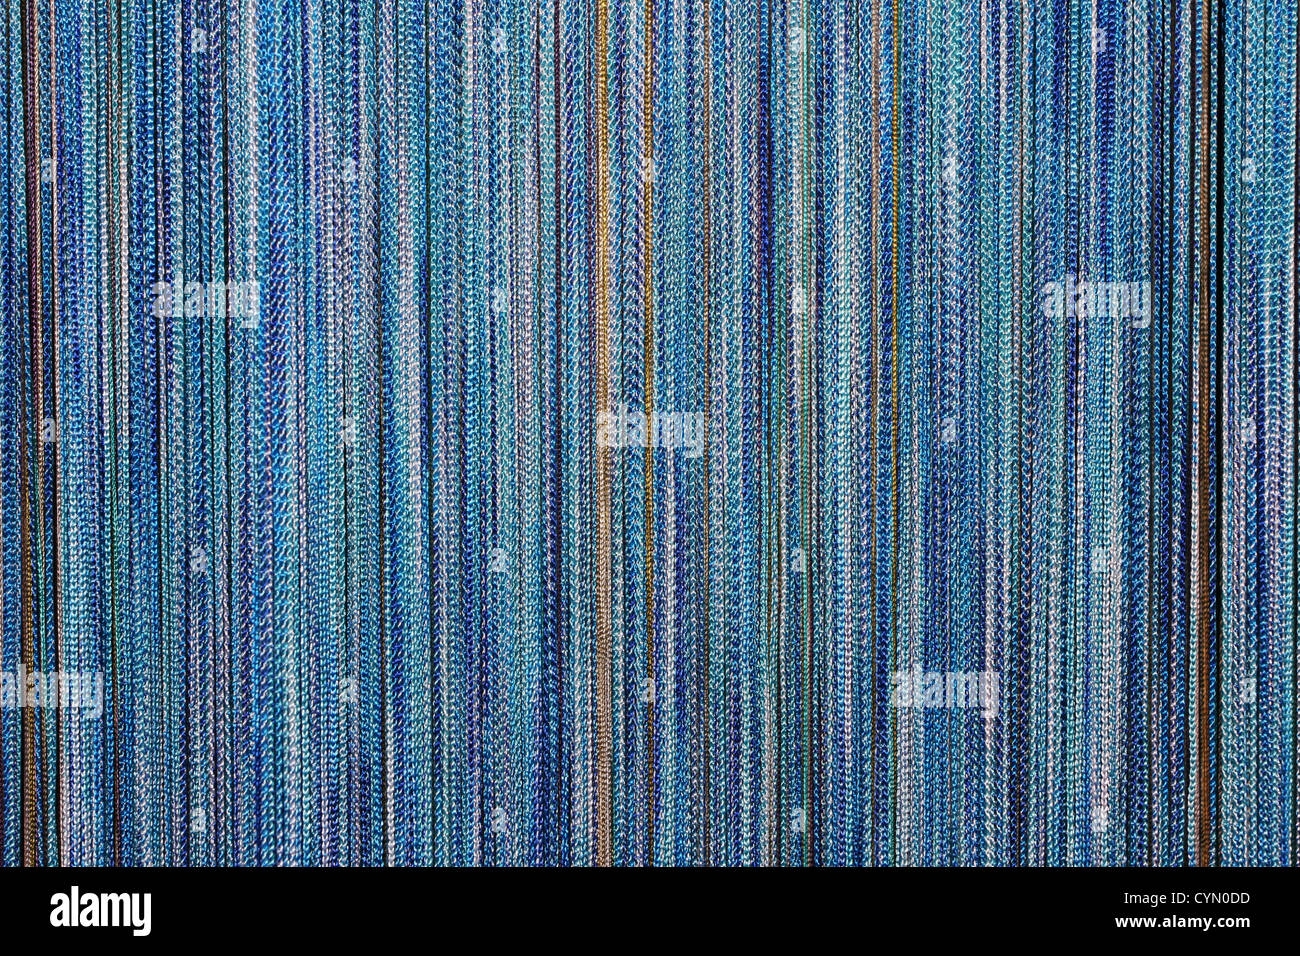 trendy blue background made of differently blue colored strings Stock Photo